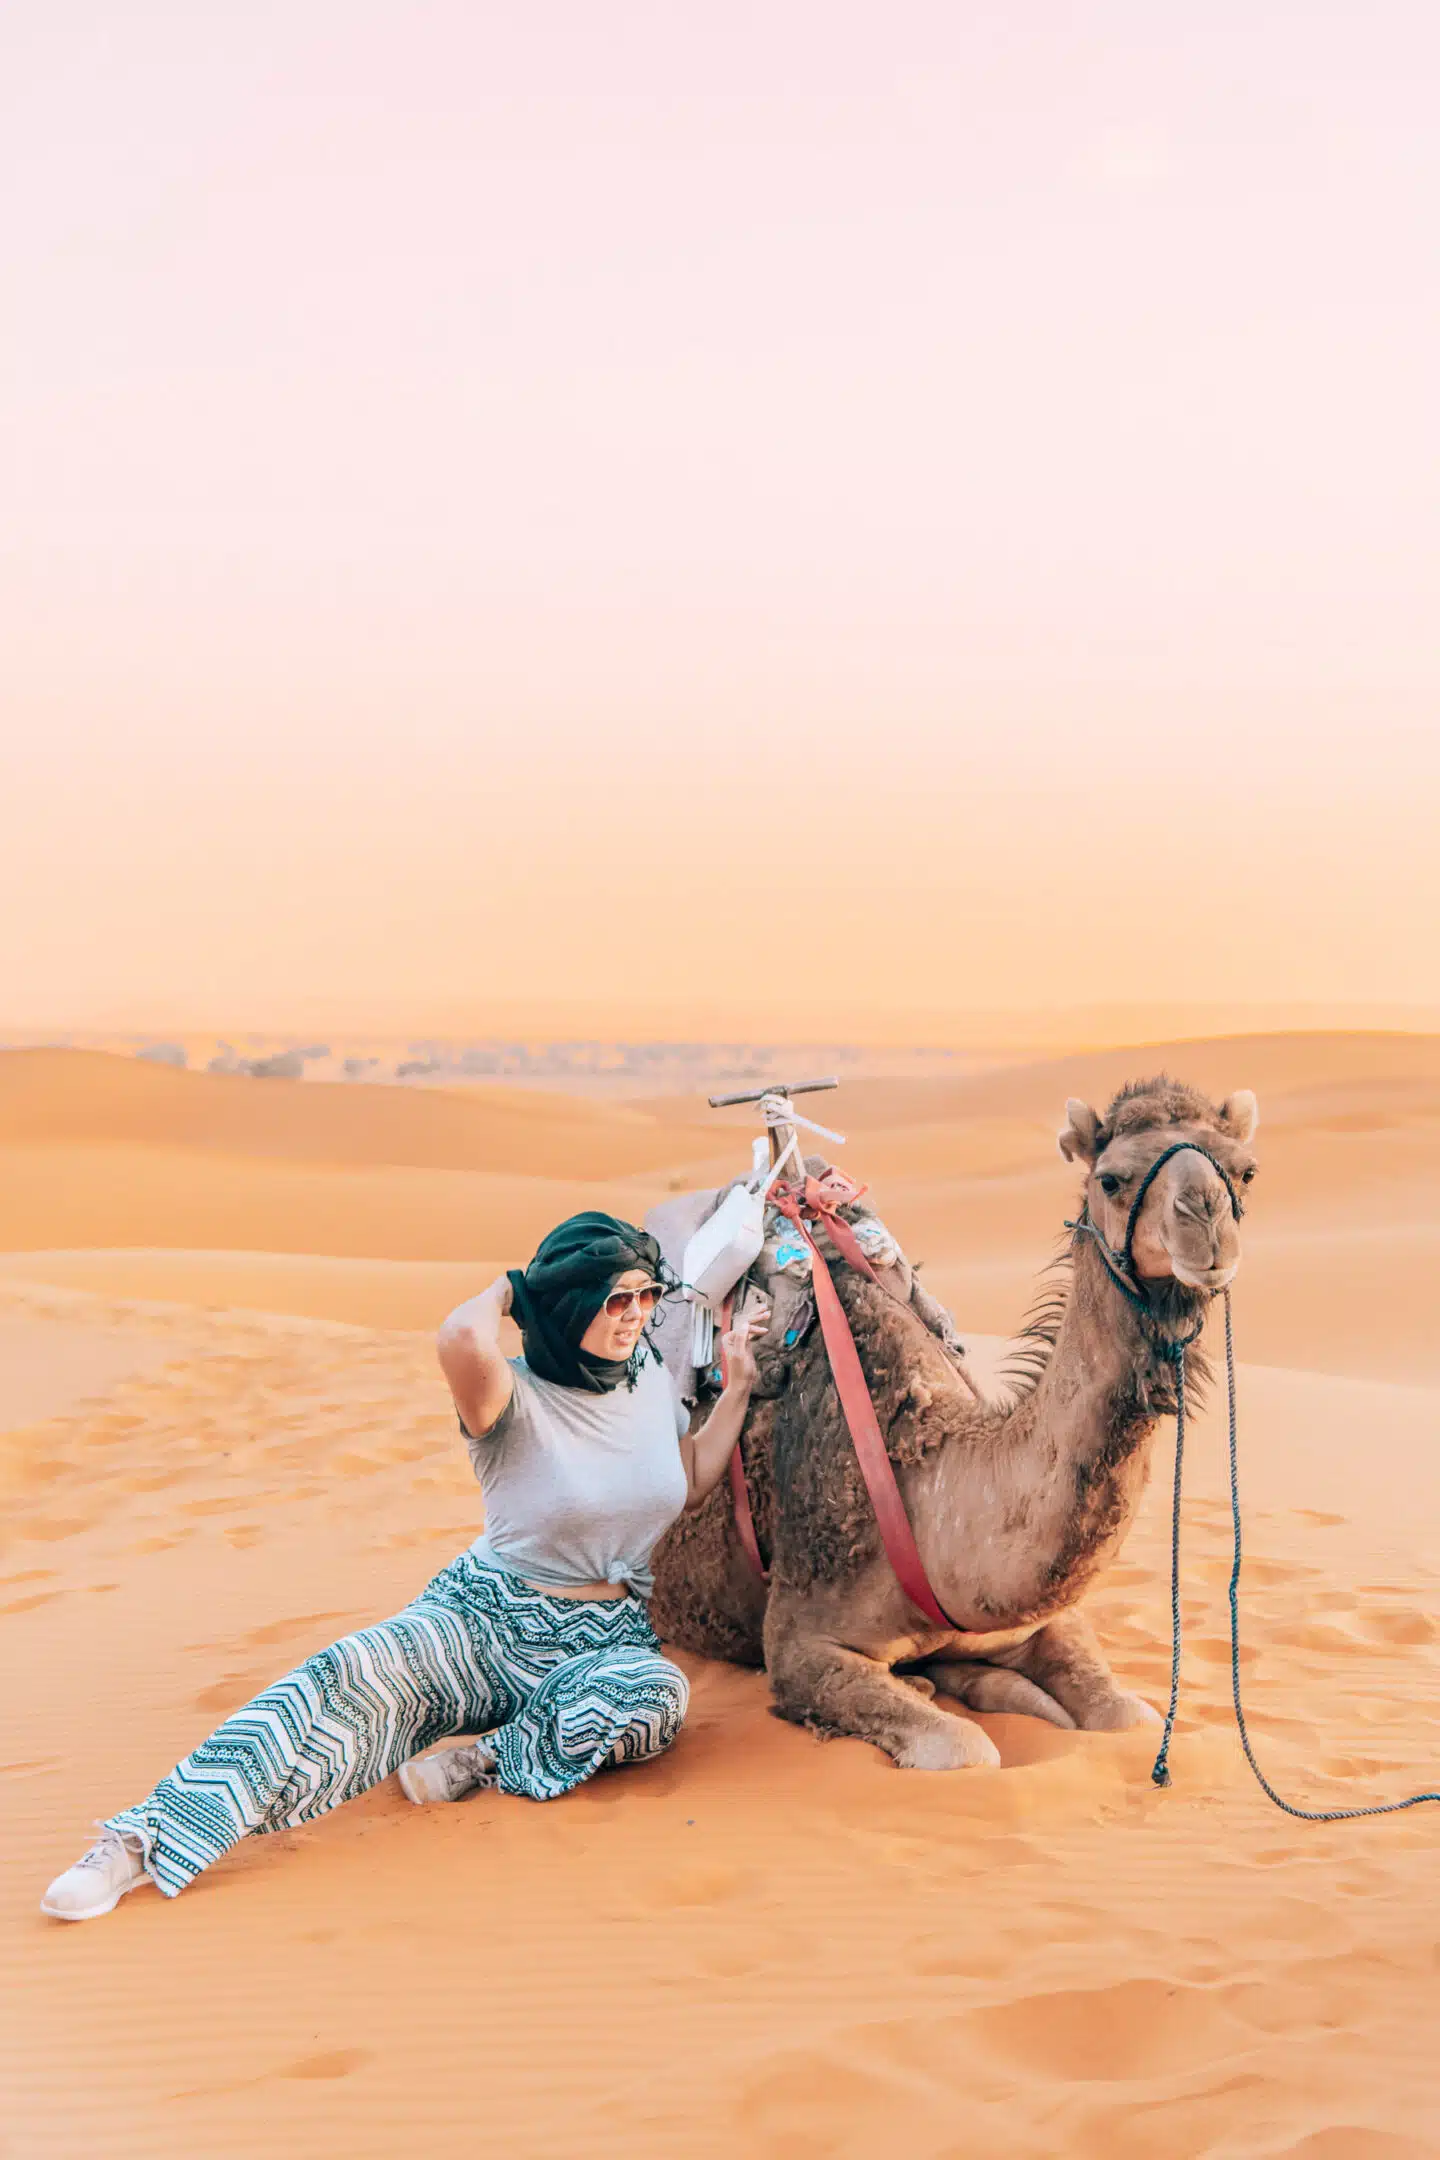 Things to do in Merzouga, by travel blogger What The Fab